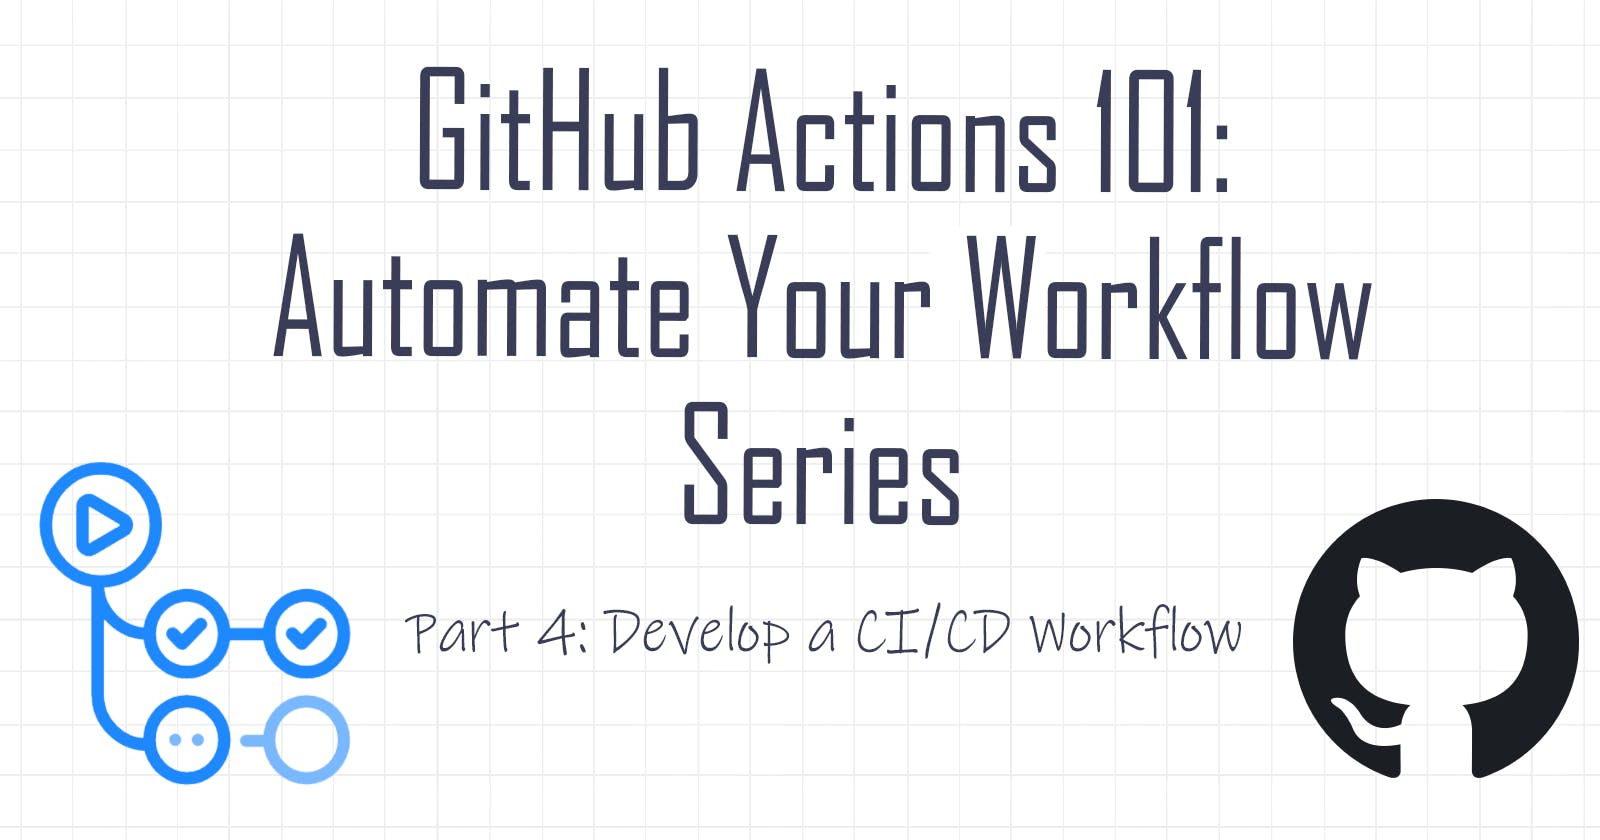 GitHub Actions 101: Develop a CI/CD Workflow